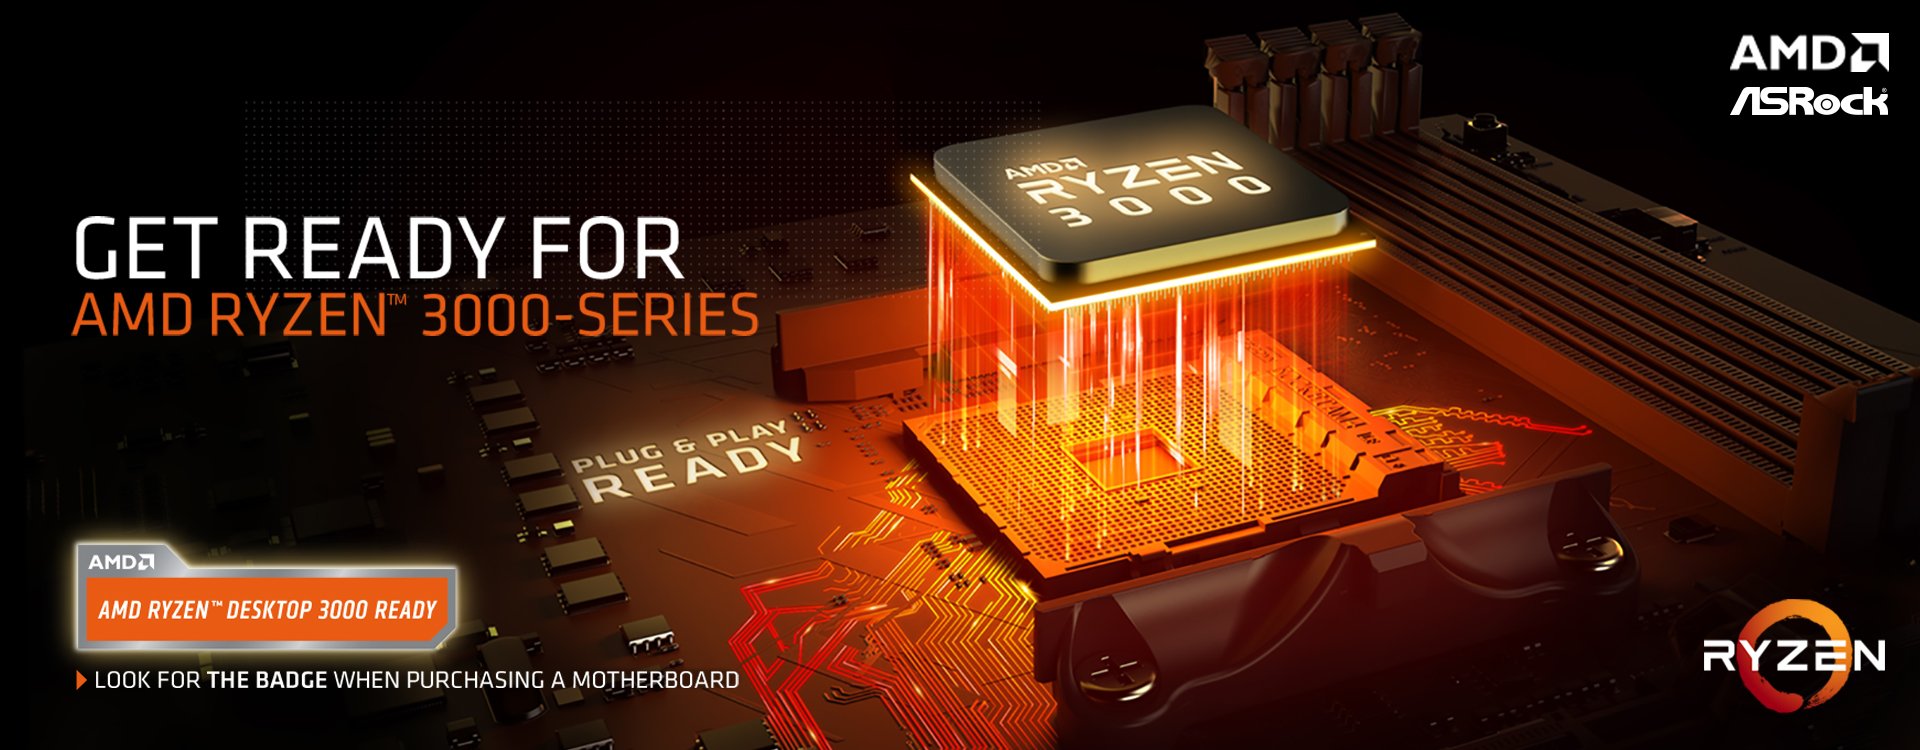 AMD Ryzen 300 Series banner that shows a graphic of a motherboard with the AMD Ryzen 3000 CPU Approaching the Socket with Light and streaming geometric graphics in between. There is also text that reads: GET READY FOR AMD RYZEN 3000-SERIES -  AMD RYZEN DESKTOP 3000 READY - PLUG & PLAY READY - LOOK FOR THE BADGE WHEN PURCHASING A MOTHERBOARD